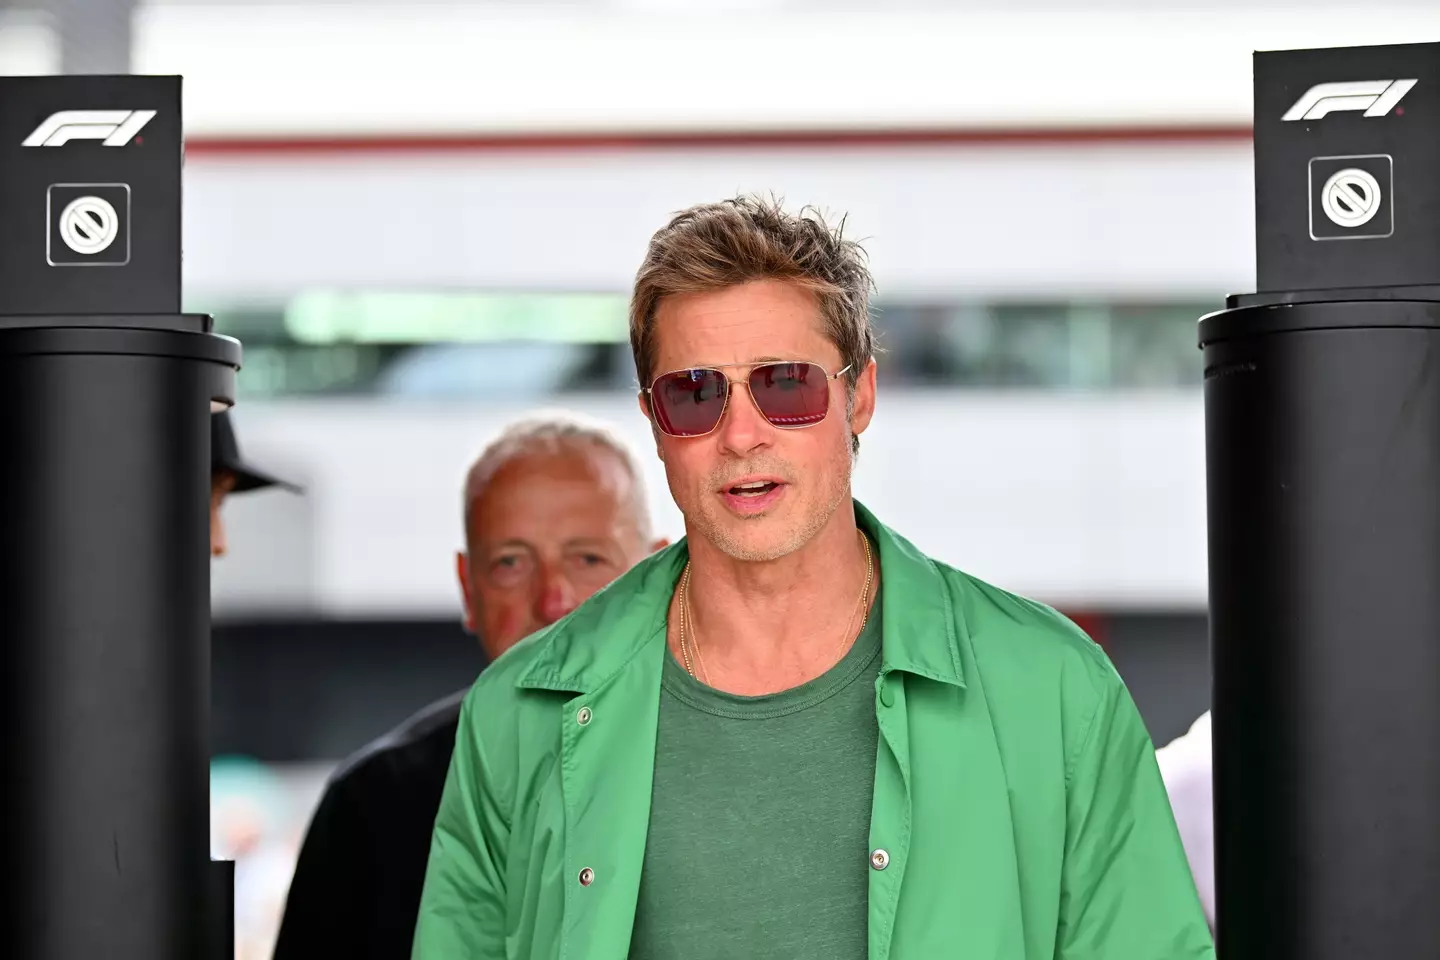 Brad Pitt blended in with the other F1 drivers as he took to the track at Sliverstone.